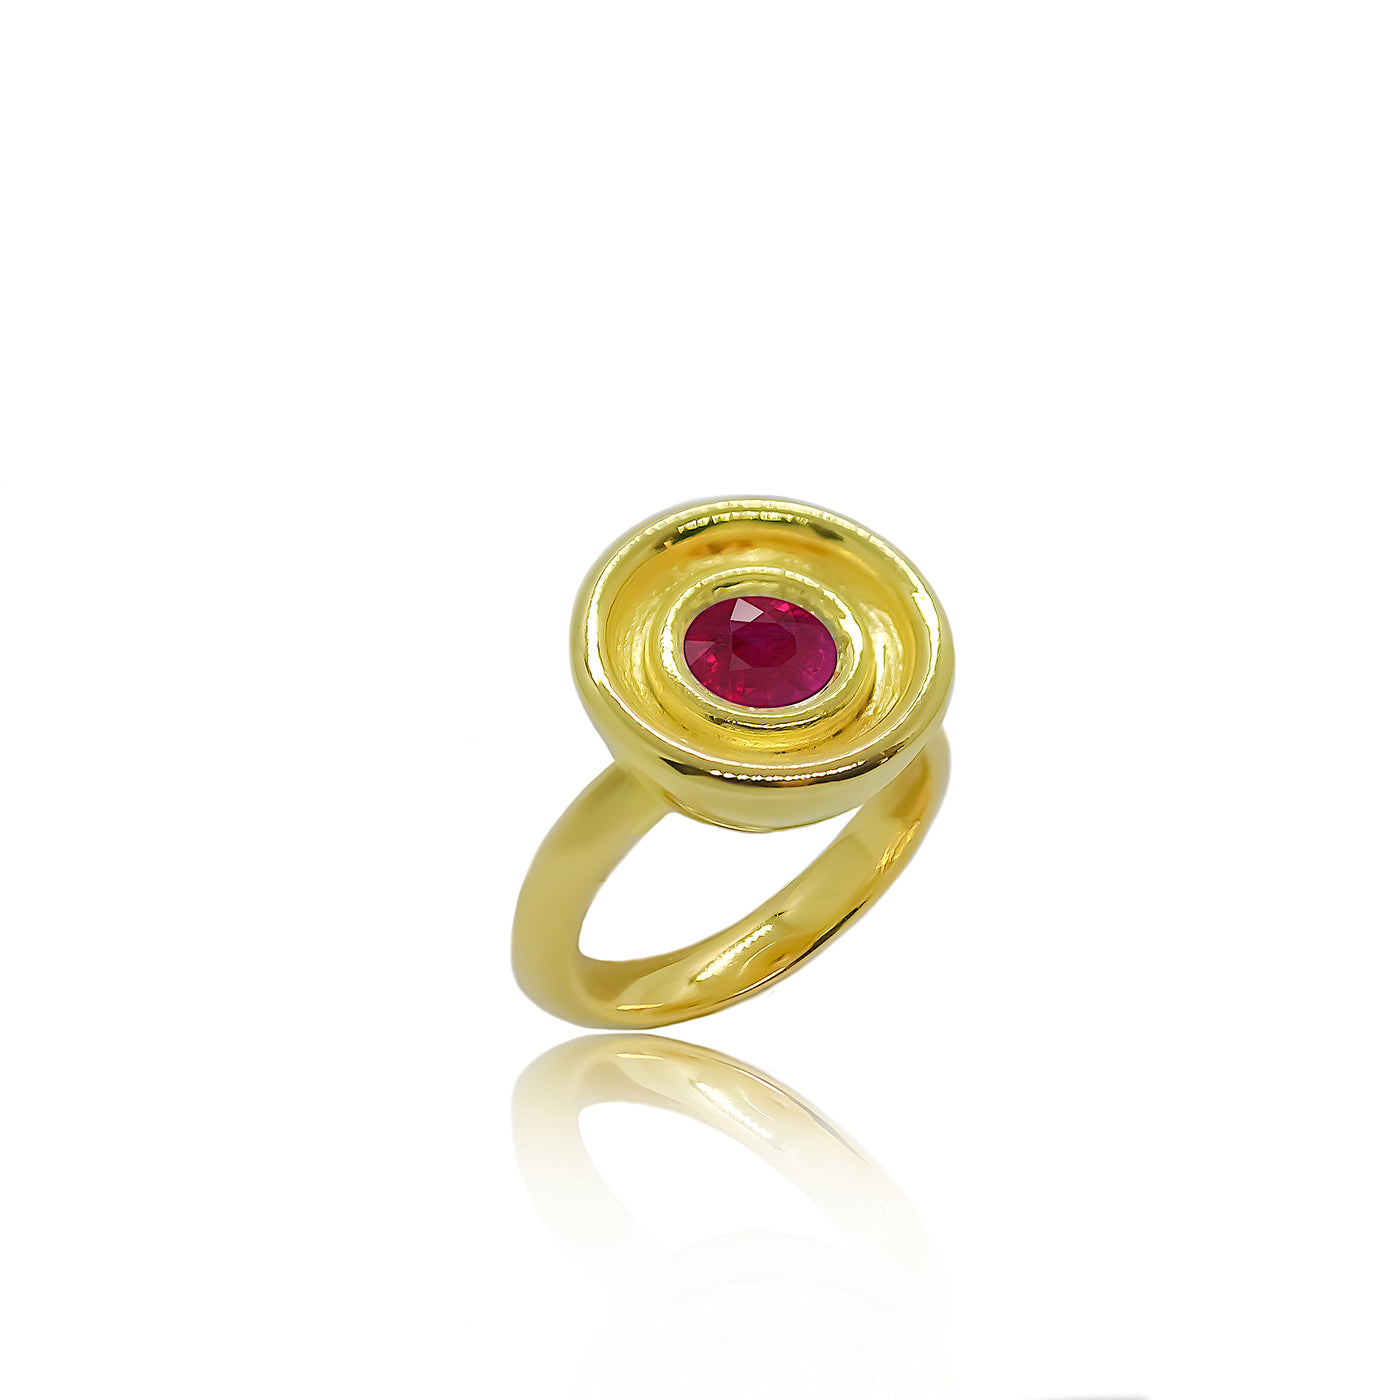 Gold solitaire cocktail ring with ruby from Atelier ORMAN